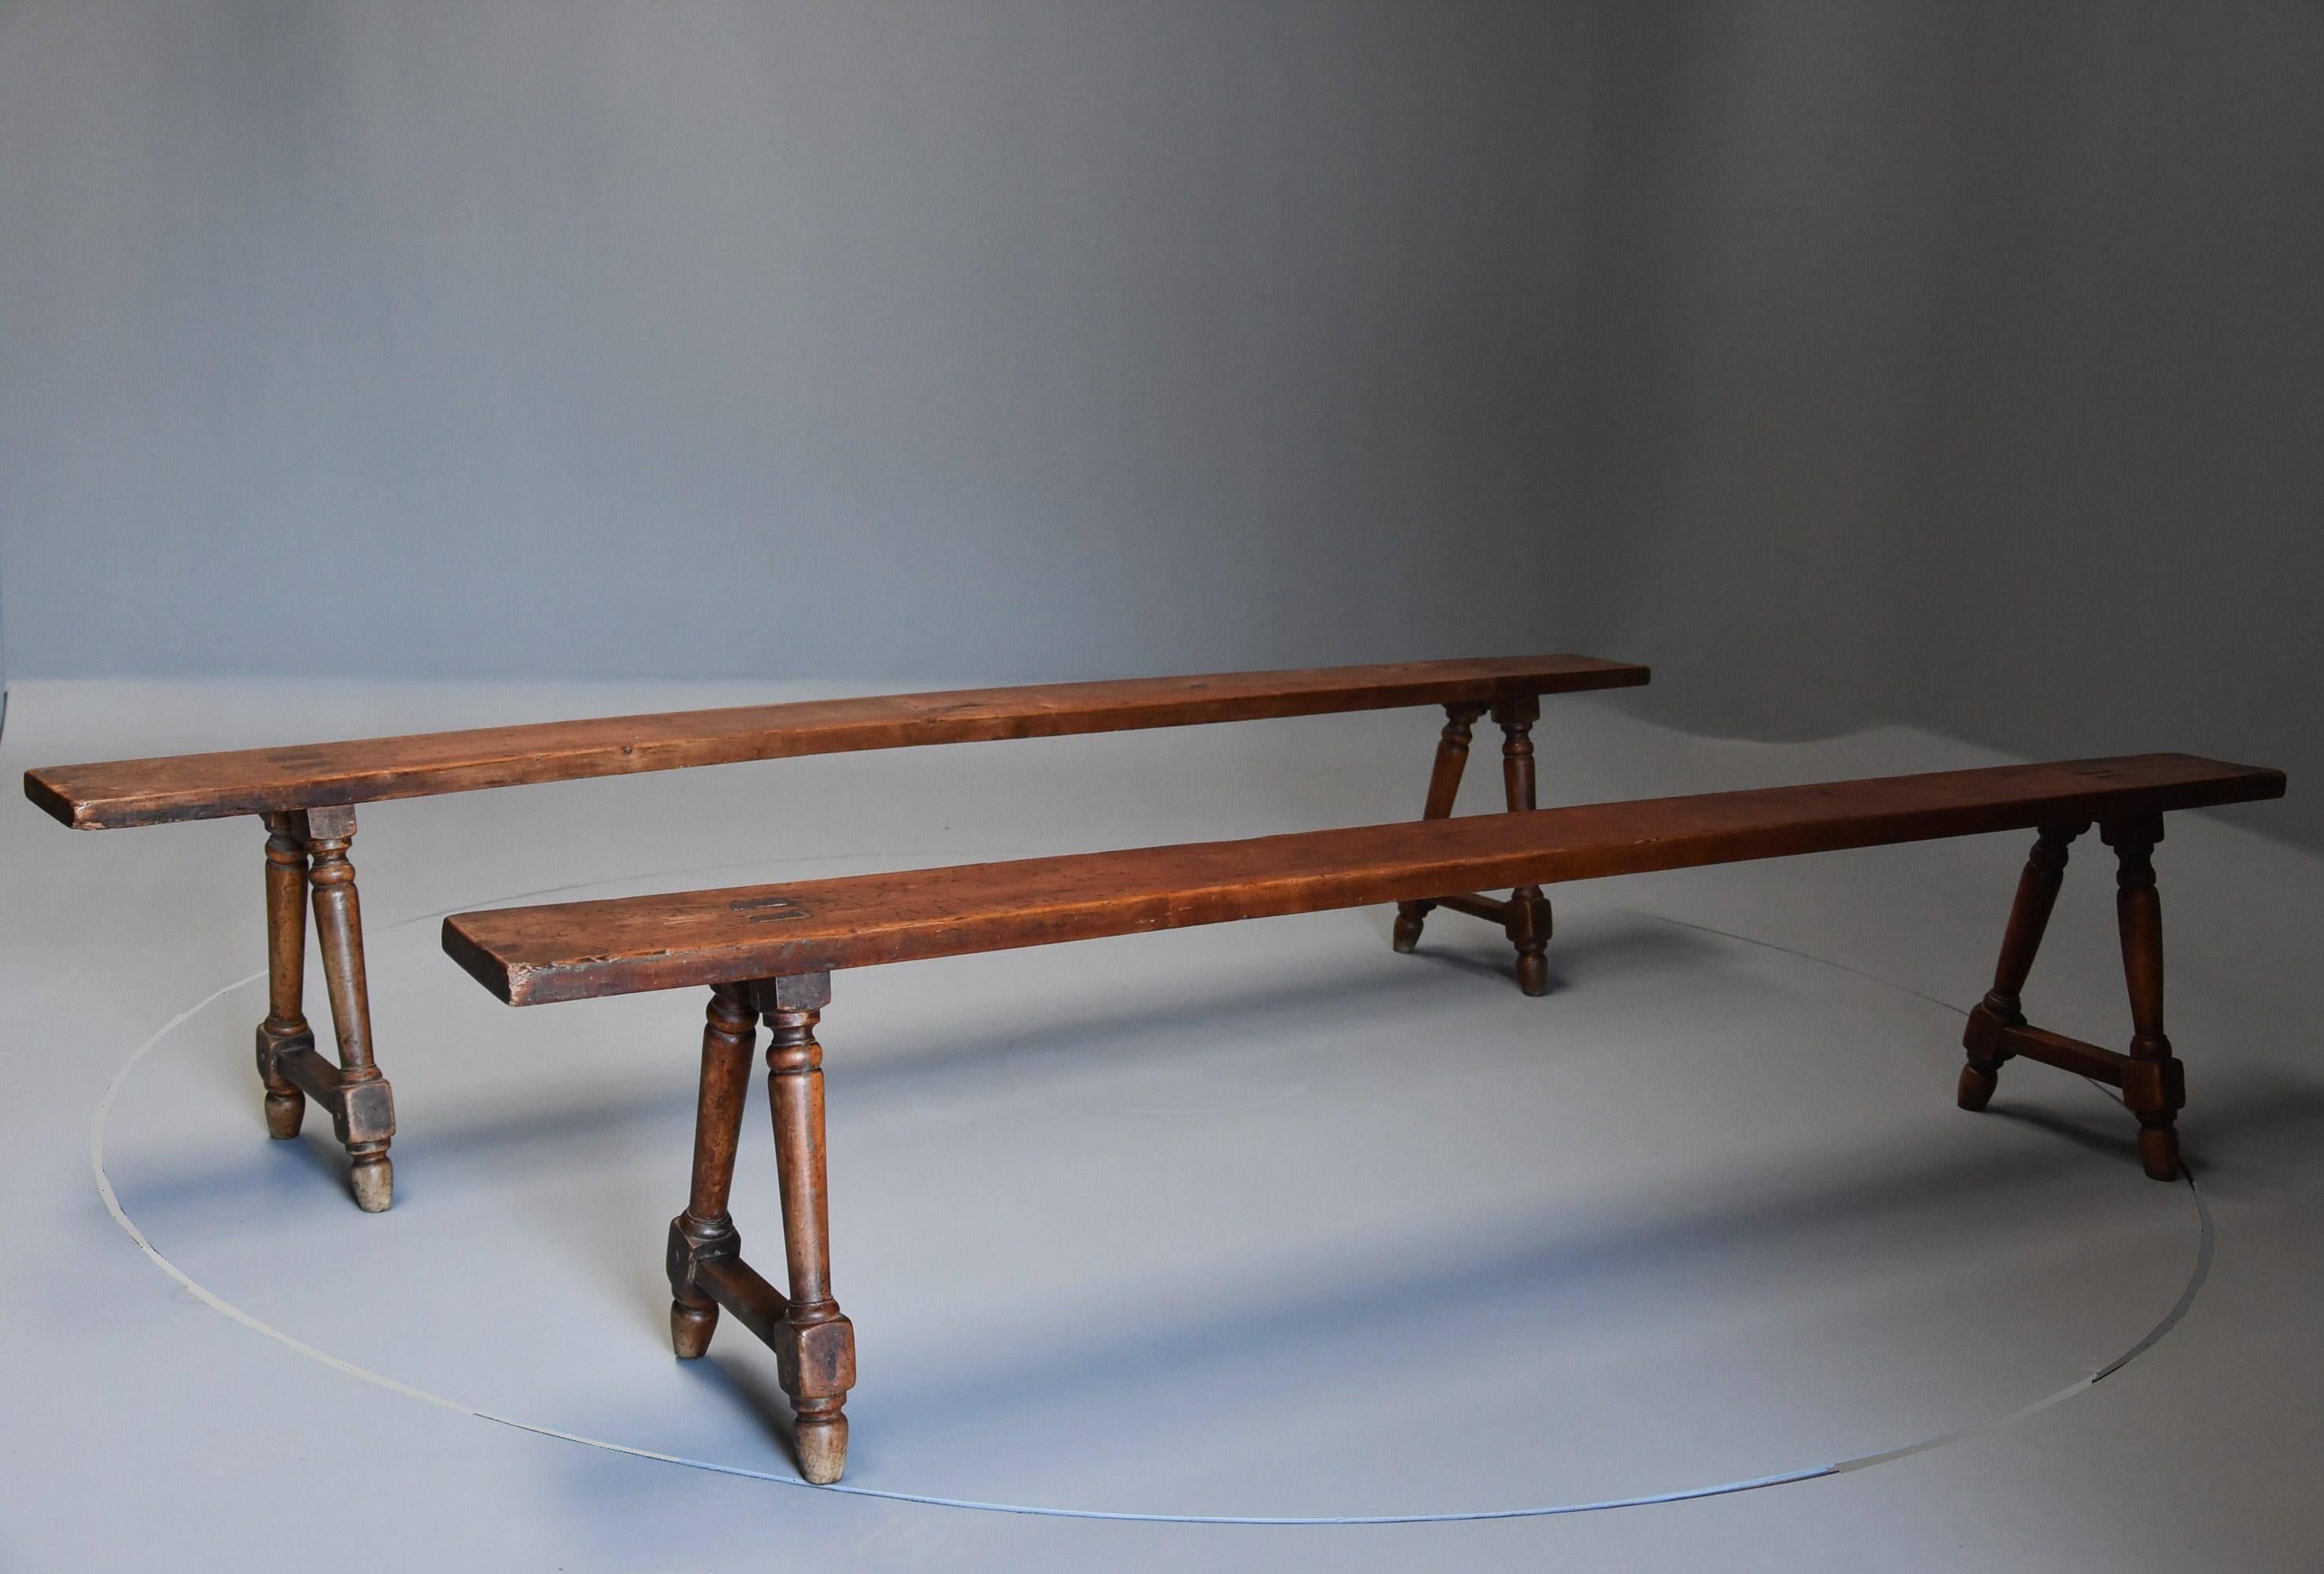 A pair of mid-19th century French fruitwood (cherry) benches of superb patina (colour).

This pair of benches, all of solid cherry, consist of long tops (or seats) supported by turned legs and stretchers.

These benches are in excellent original